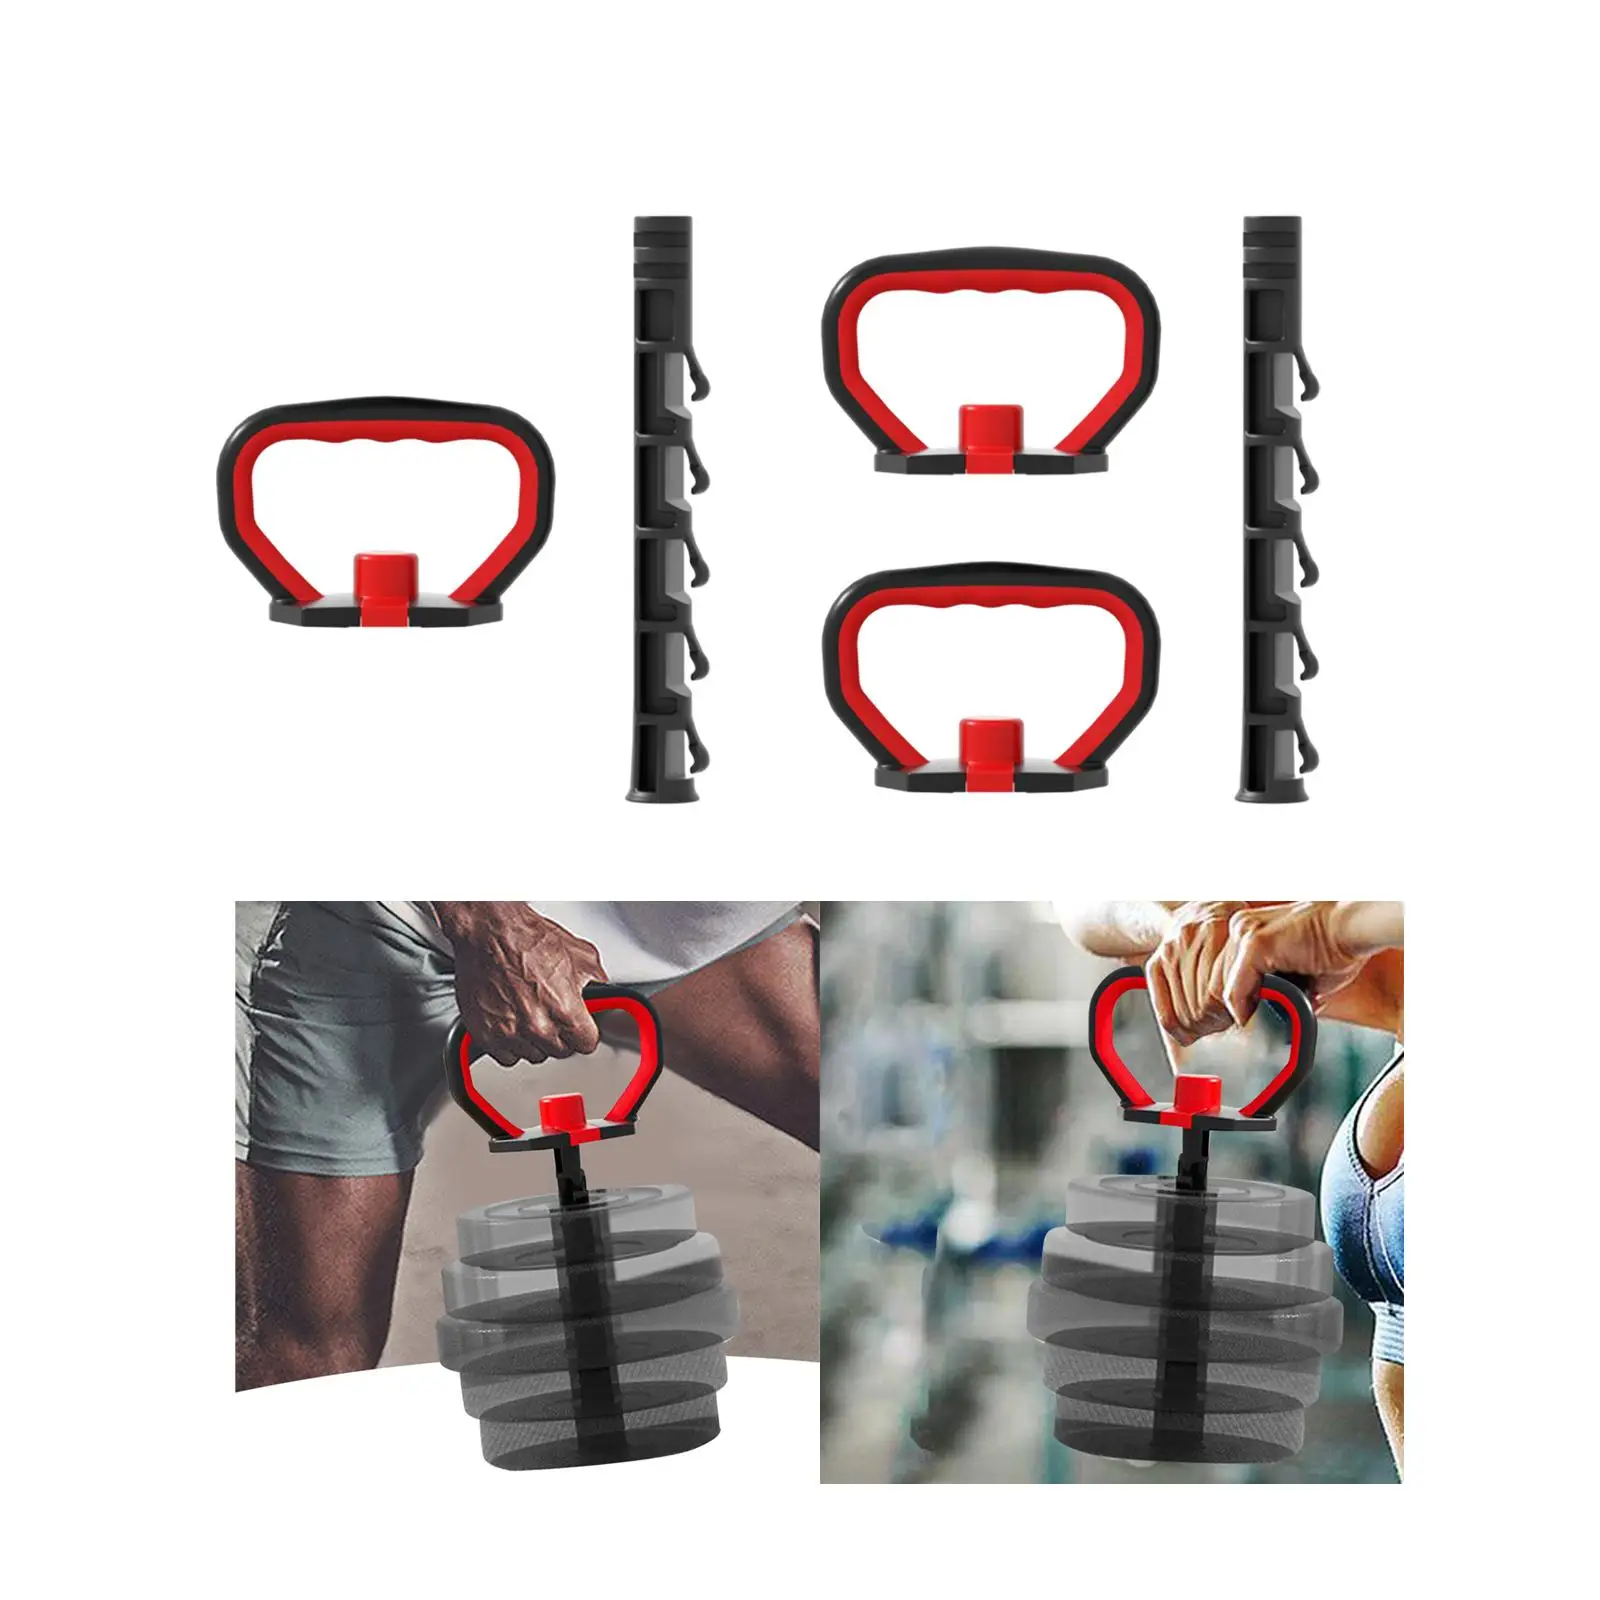 Adjustable Kettlebell Handle with Base Dumbbell Grip Kettlebell Push up Exercise Fitness Weights Exercise for Plates Weights